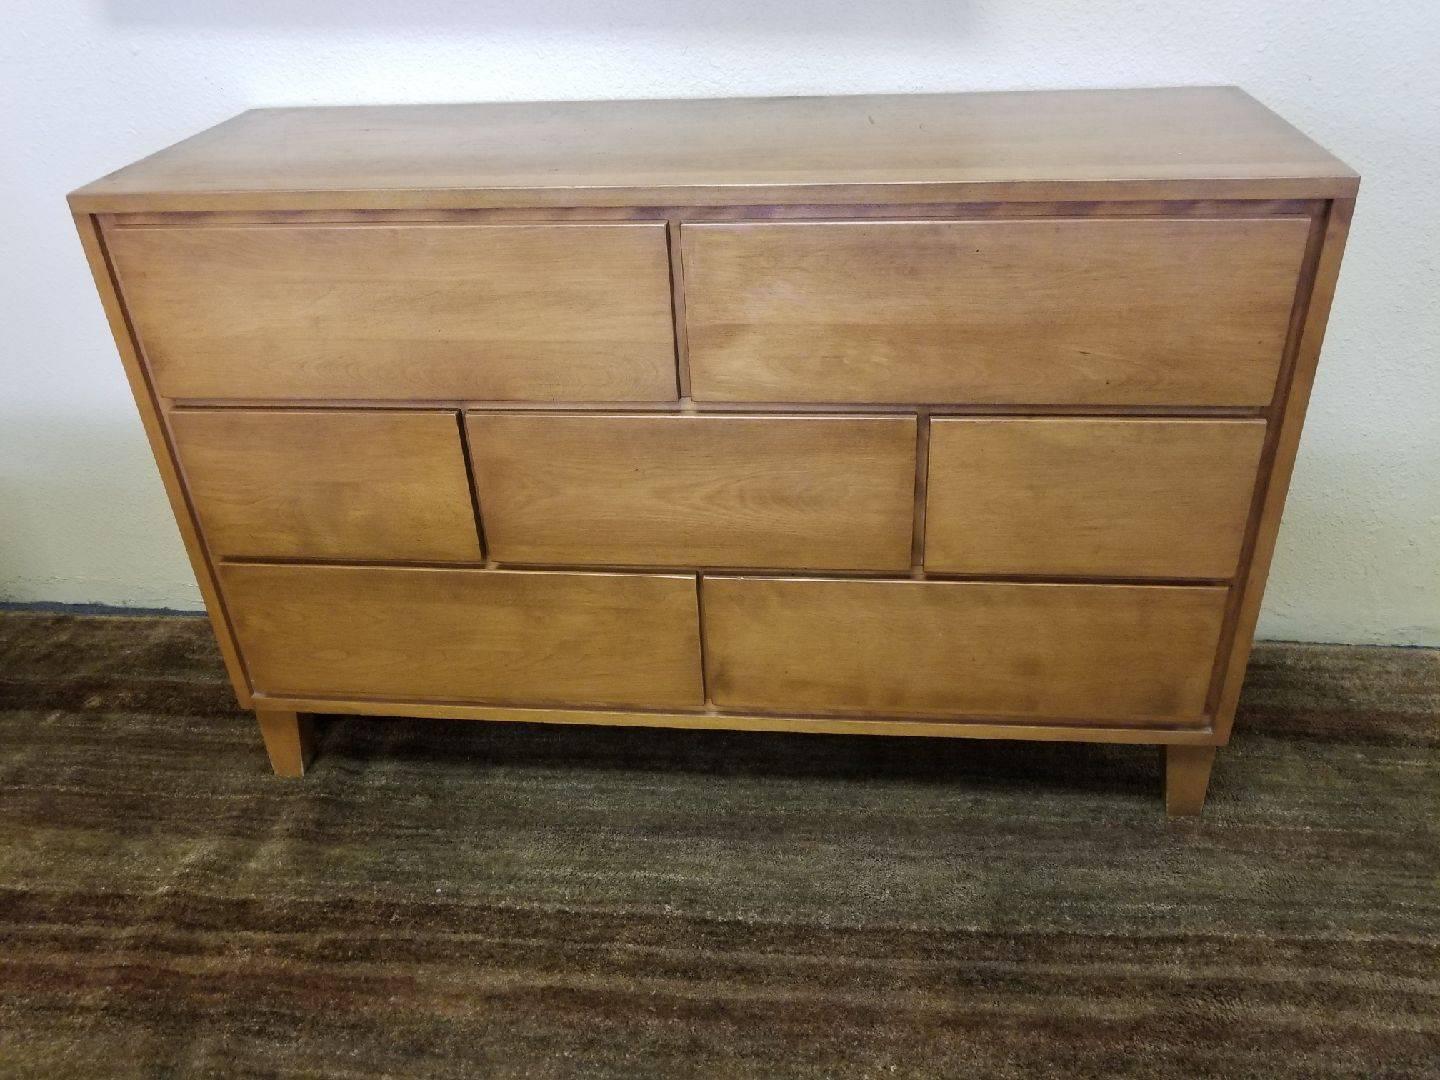 Stylish and functional seven-drawer dresser or chest of drawers by Leslie Diamond for the ModernMates collection manufactured by Conant Ball of Massachusetts, circa 1950s. The dresser is in very good vintage condition and is made of solid birch with